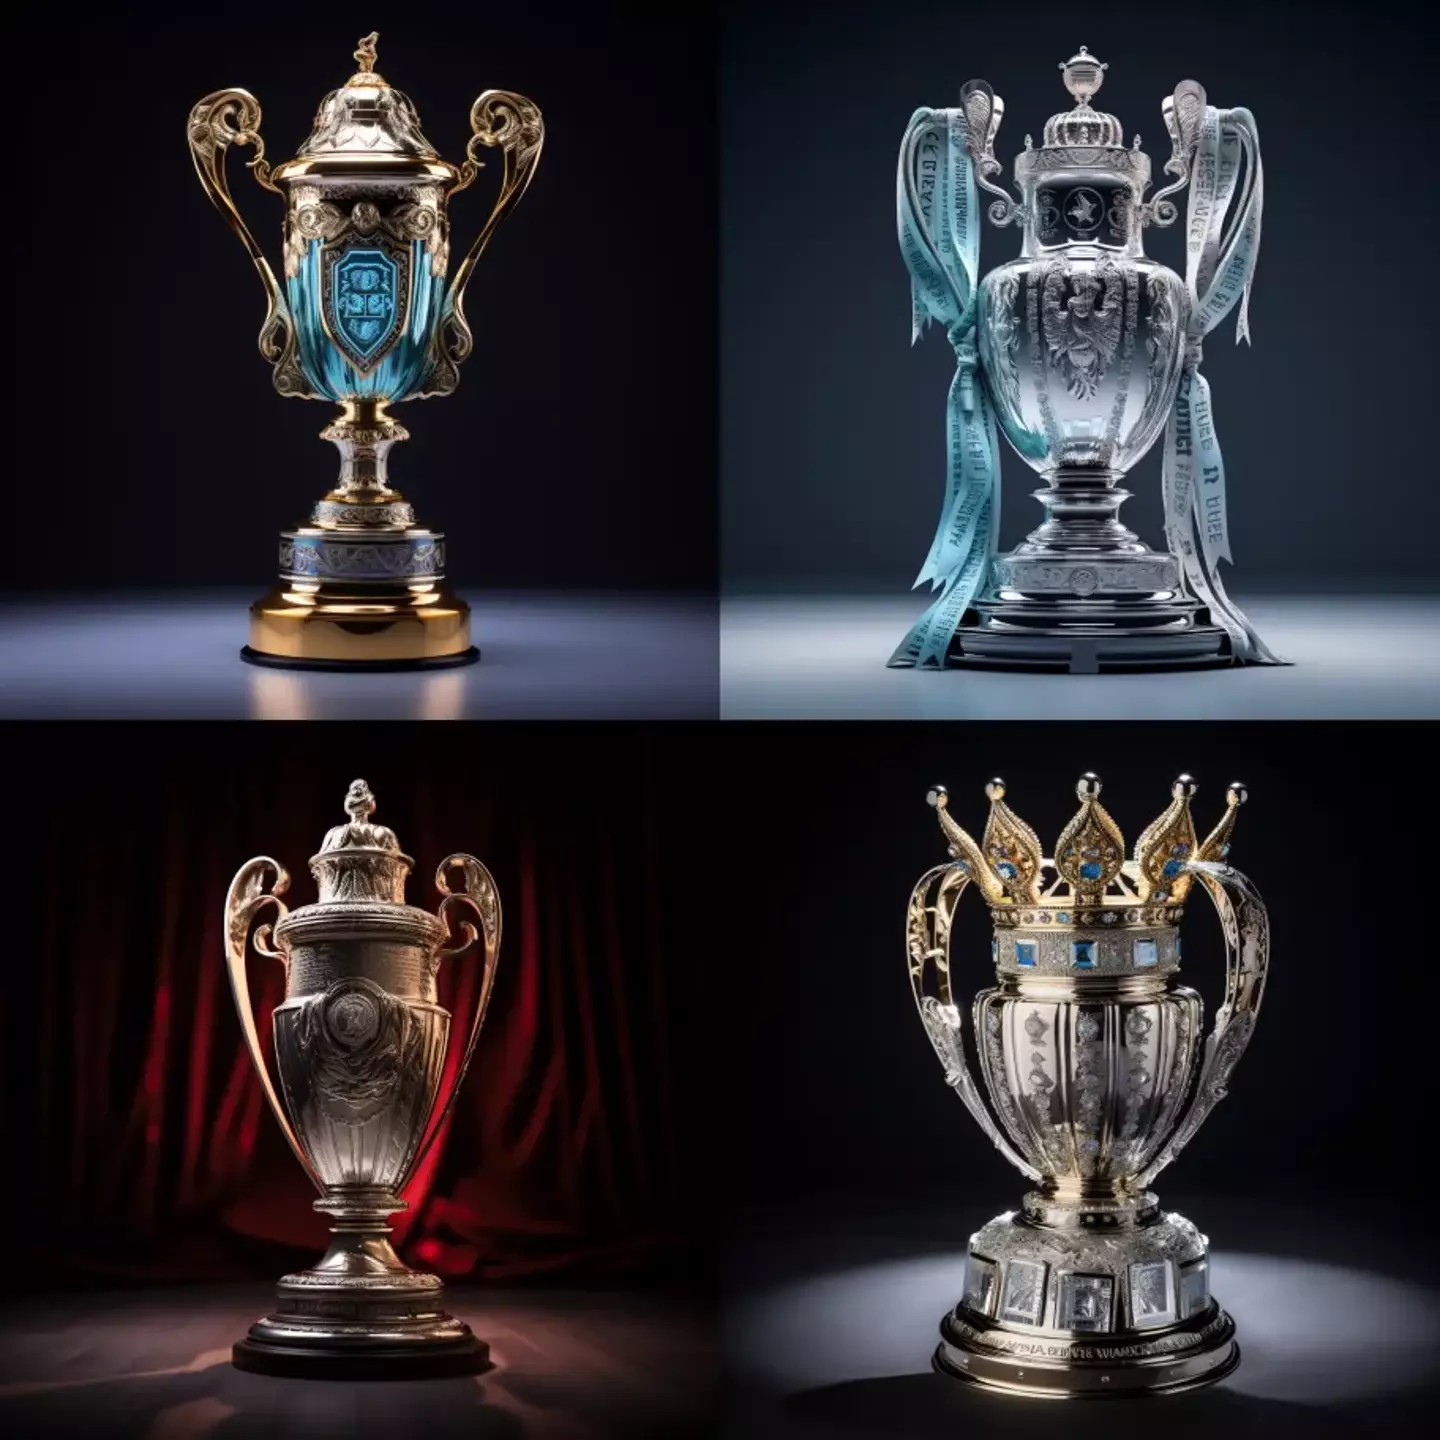 A representation of how AI thinks the Premier League trophy will evolve.